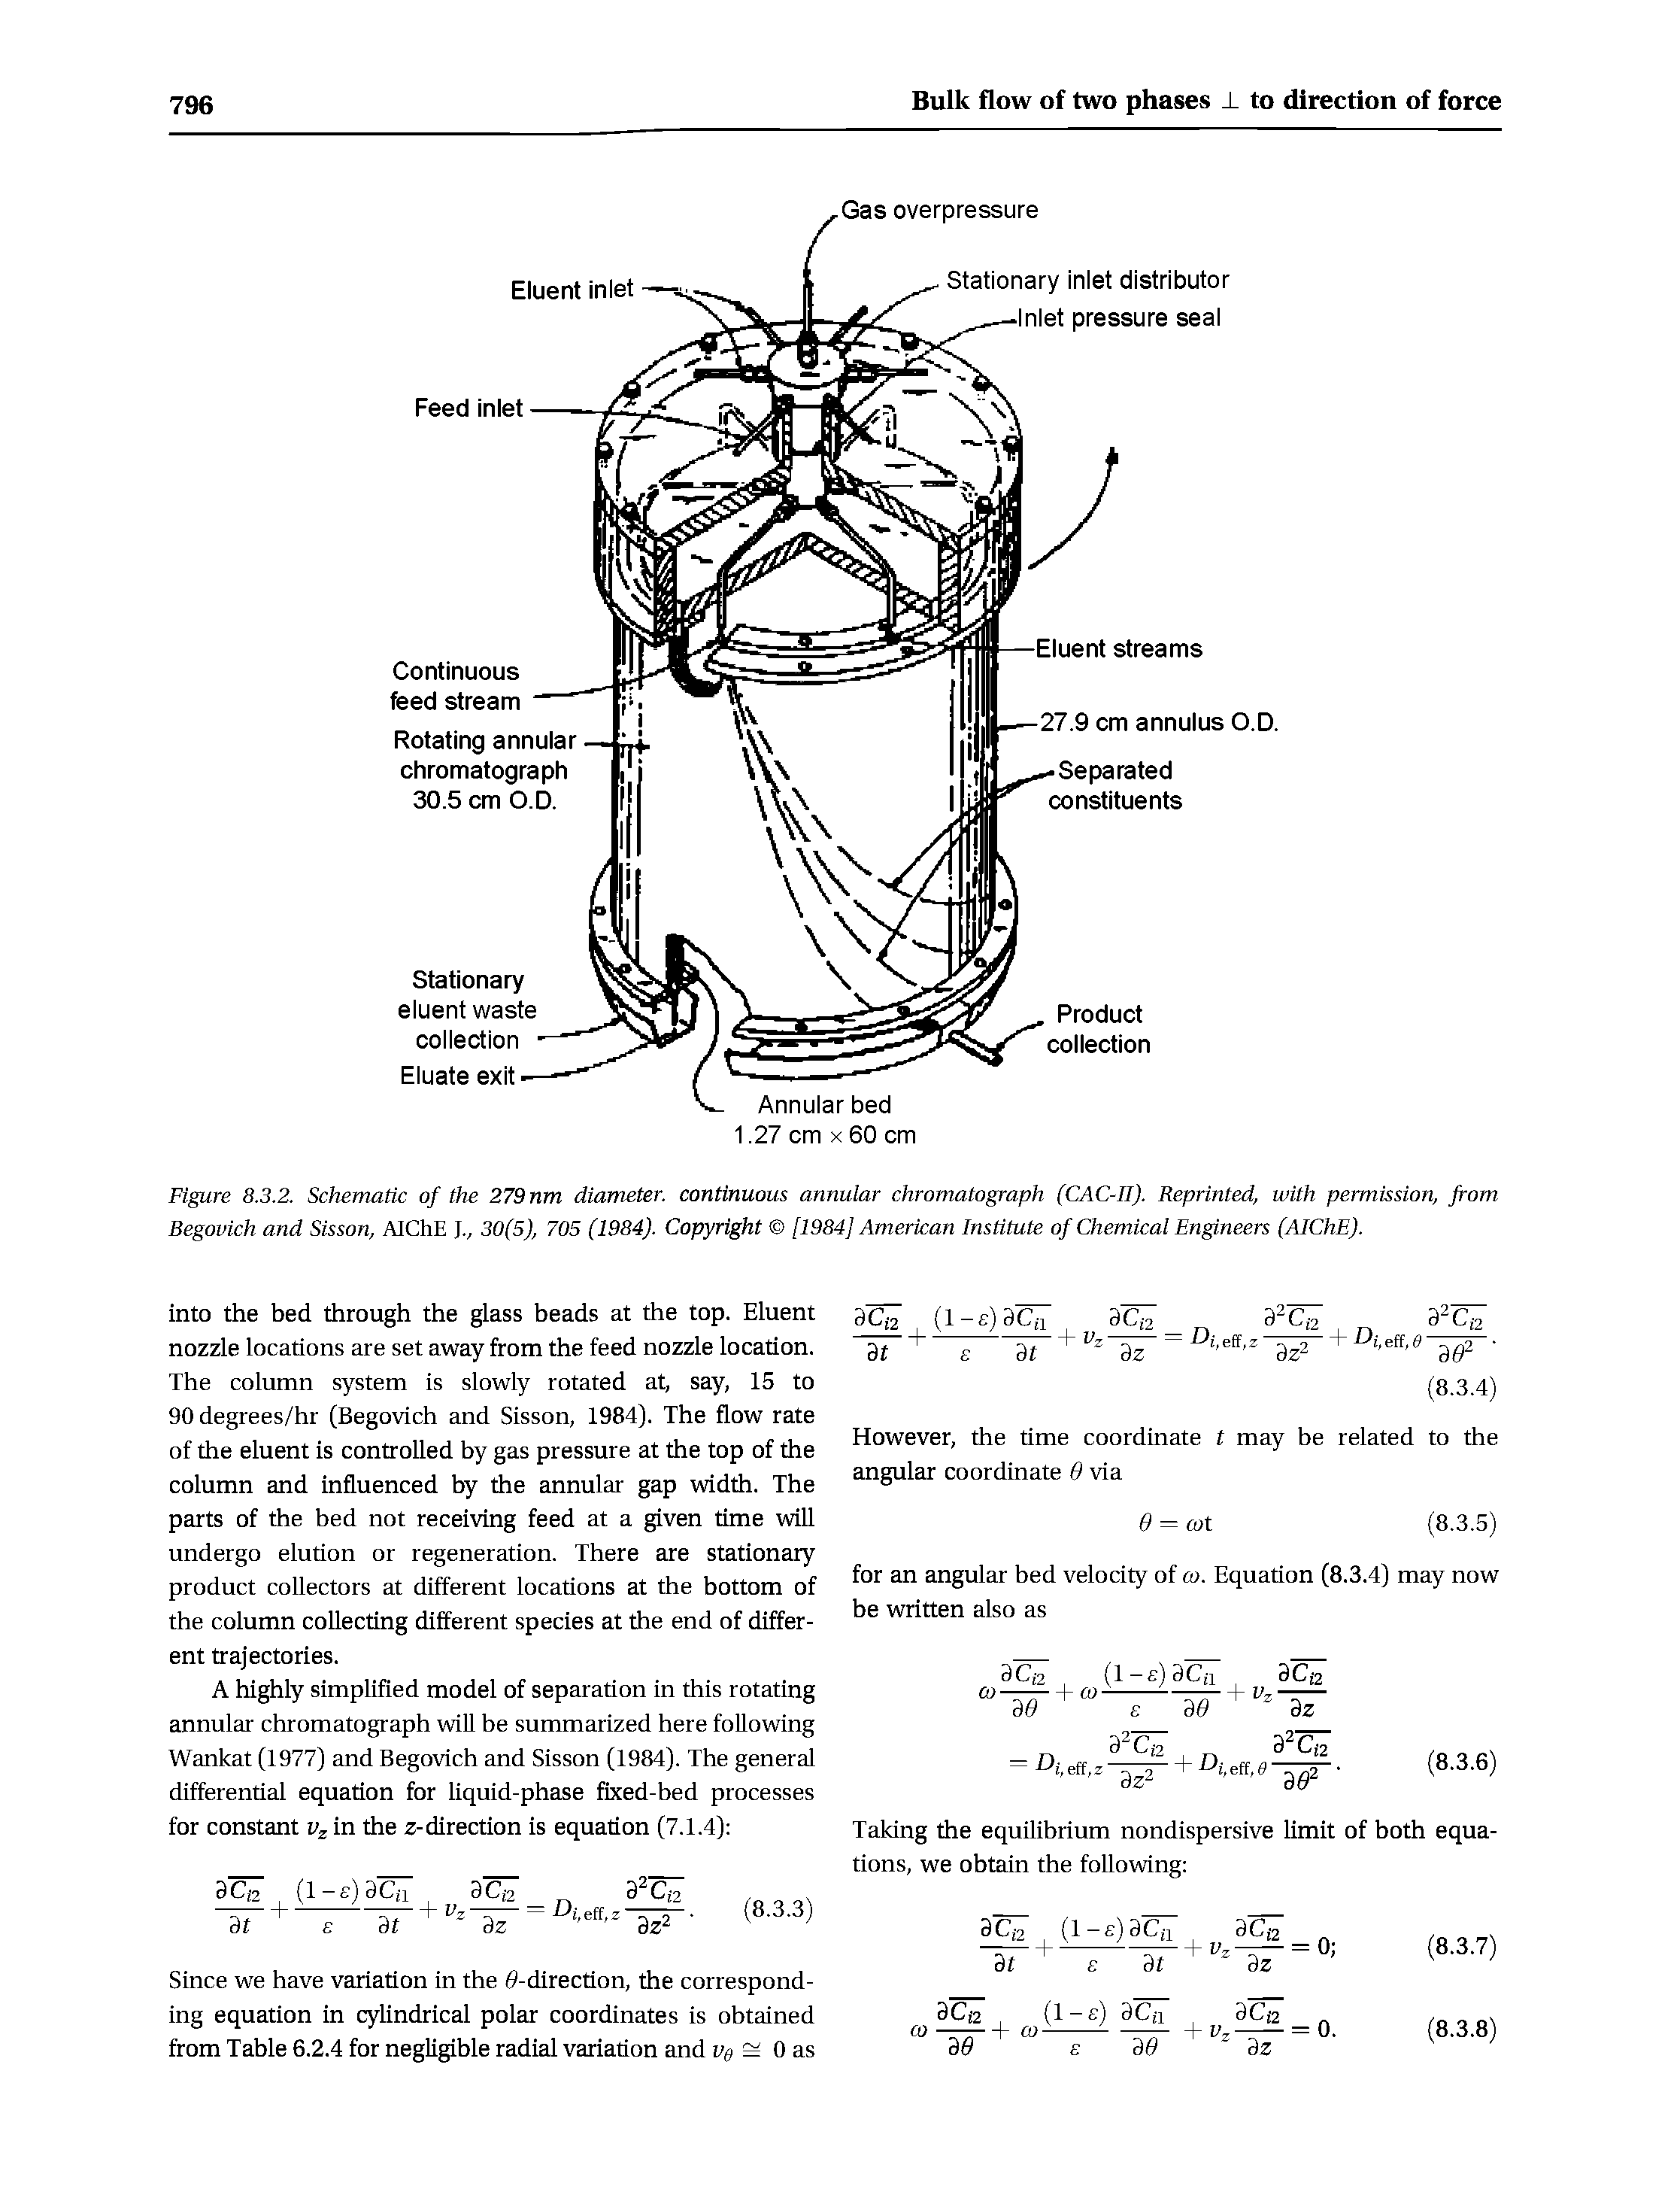 Figure 8.3.2. Schematic of the 279 nm diameter, continuous annular chromatograph (CAC-n). Reprinted, with permission, from Begovich and Sisson, AIChE ]., 30(5), 705 (1984). Copyright [1984] American Institute of Chemical Engineers (AIChE).